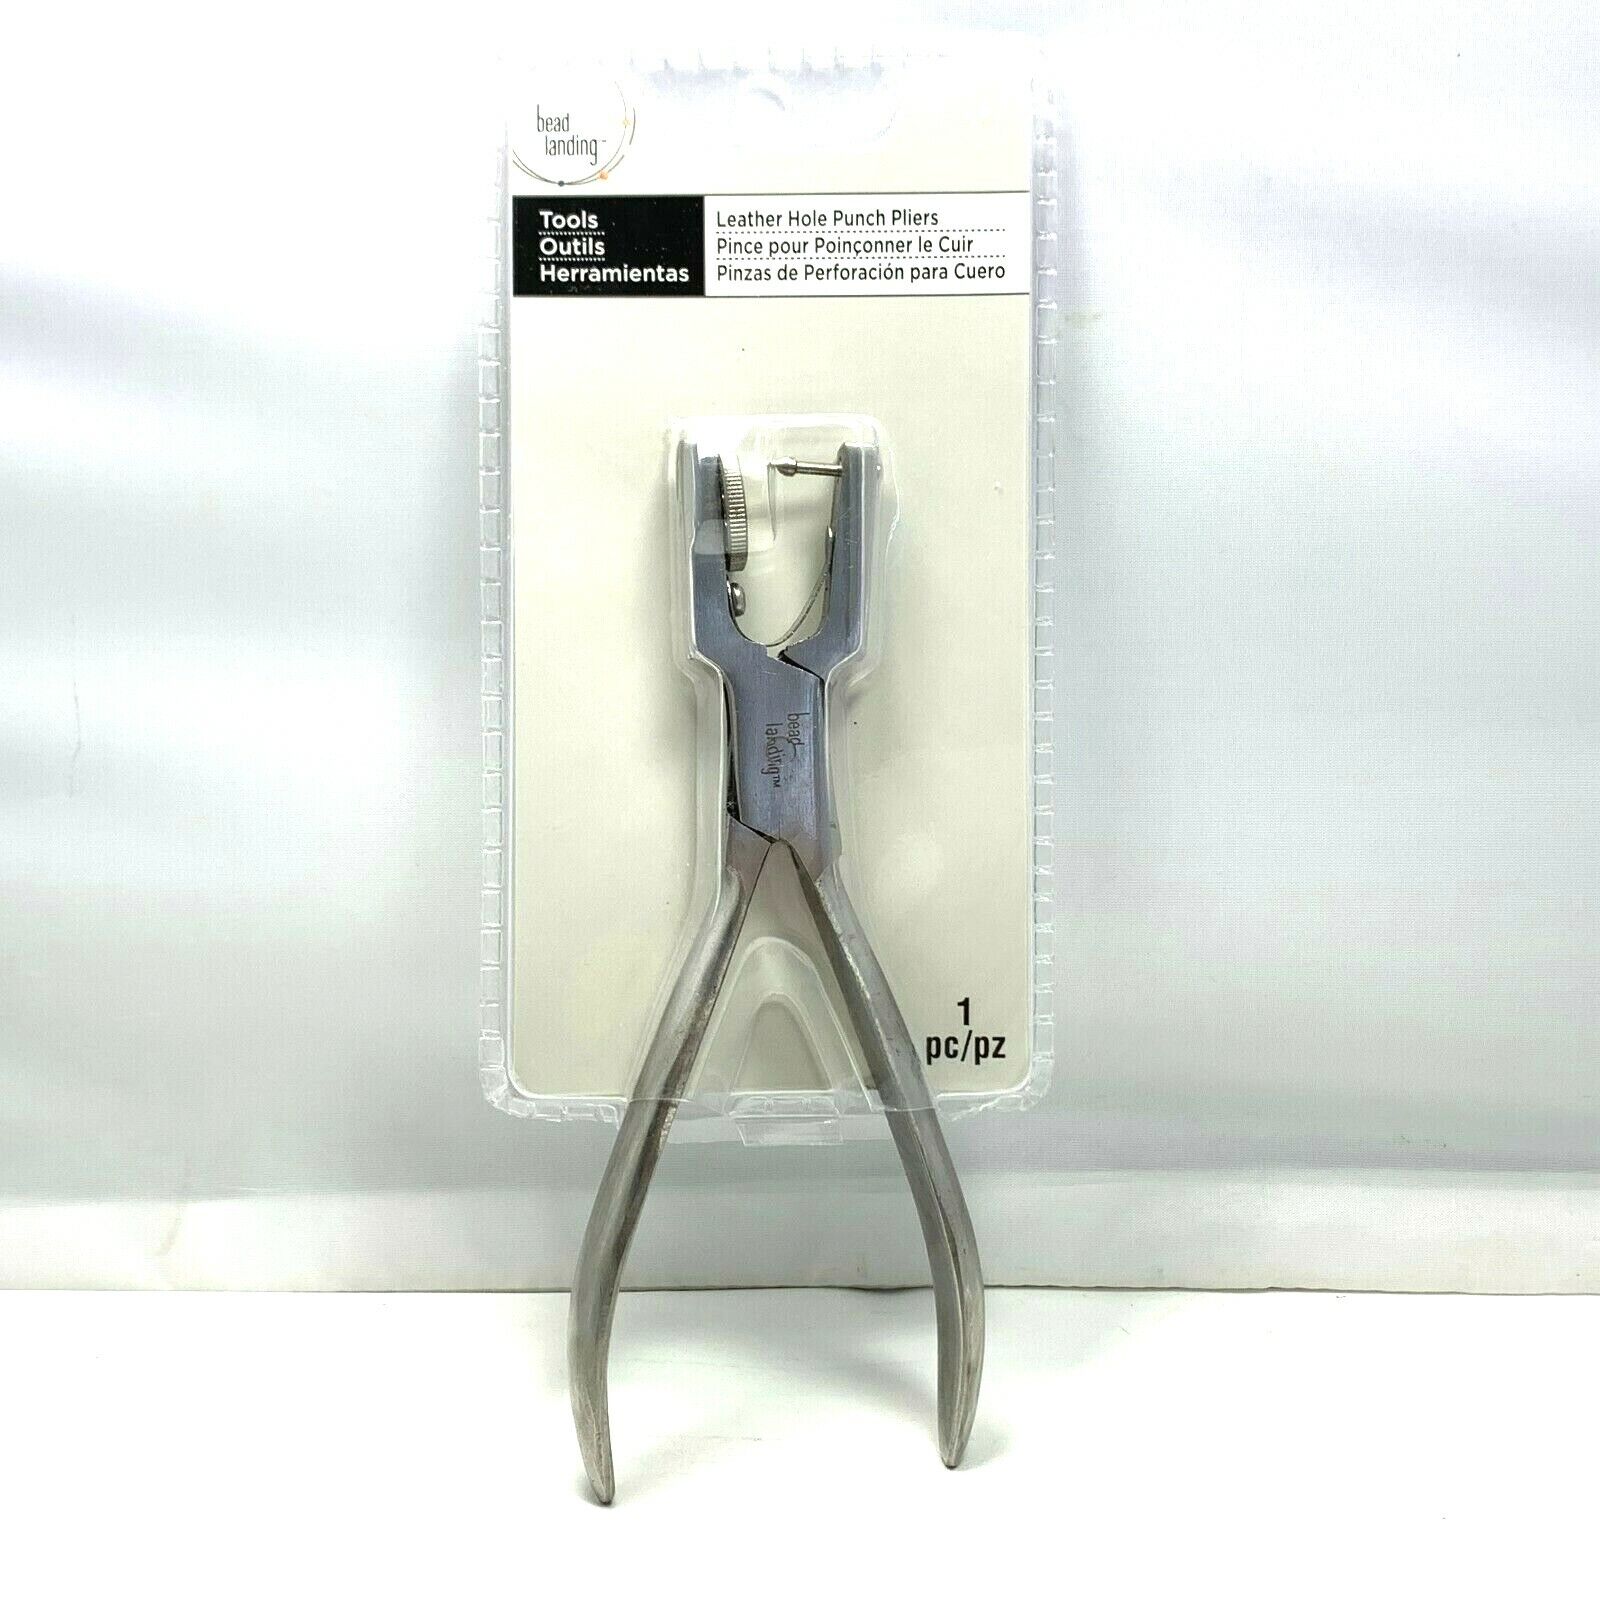 Bead Landing Leather Hole Punch Pliers (1pc) *220173* New Sealed